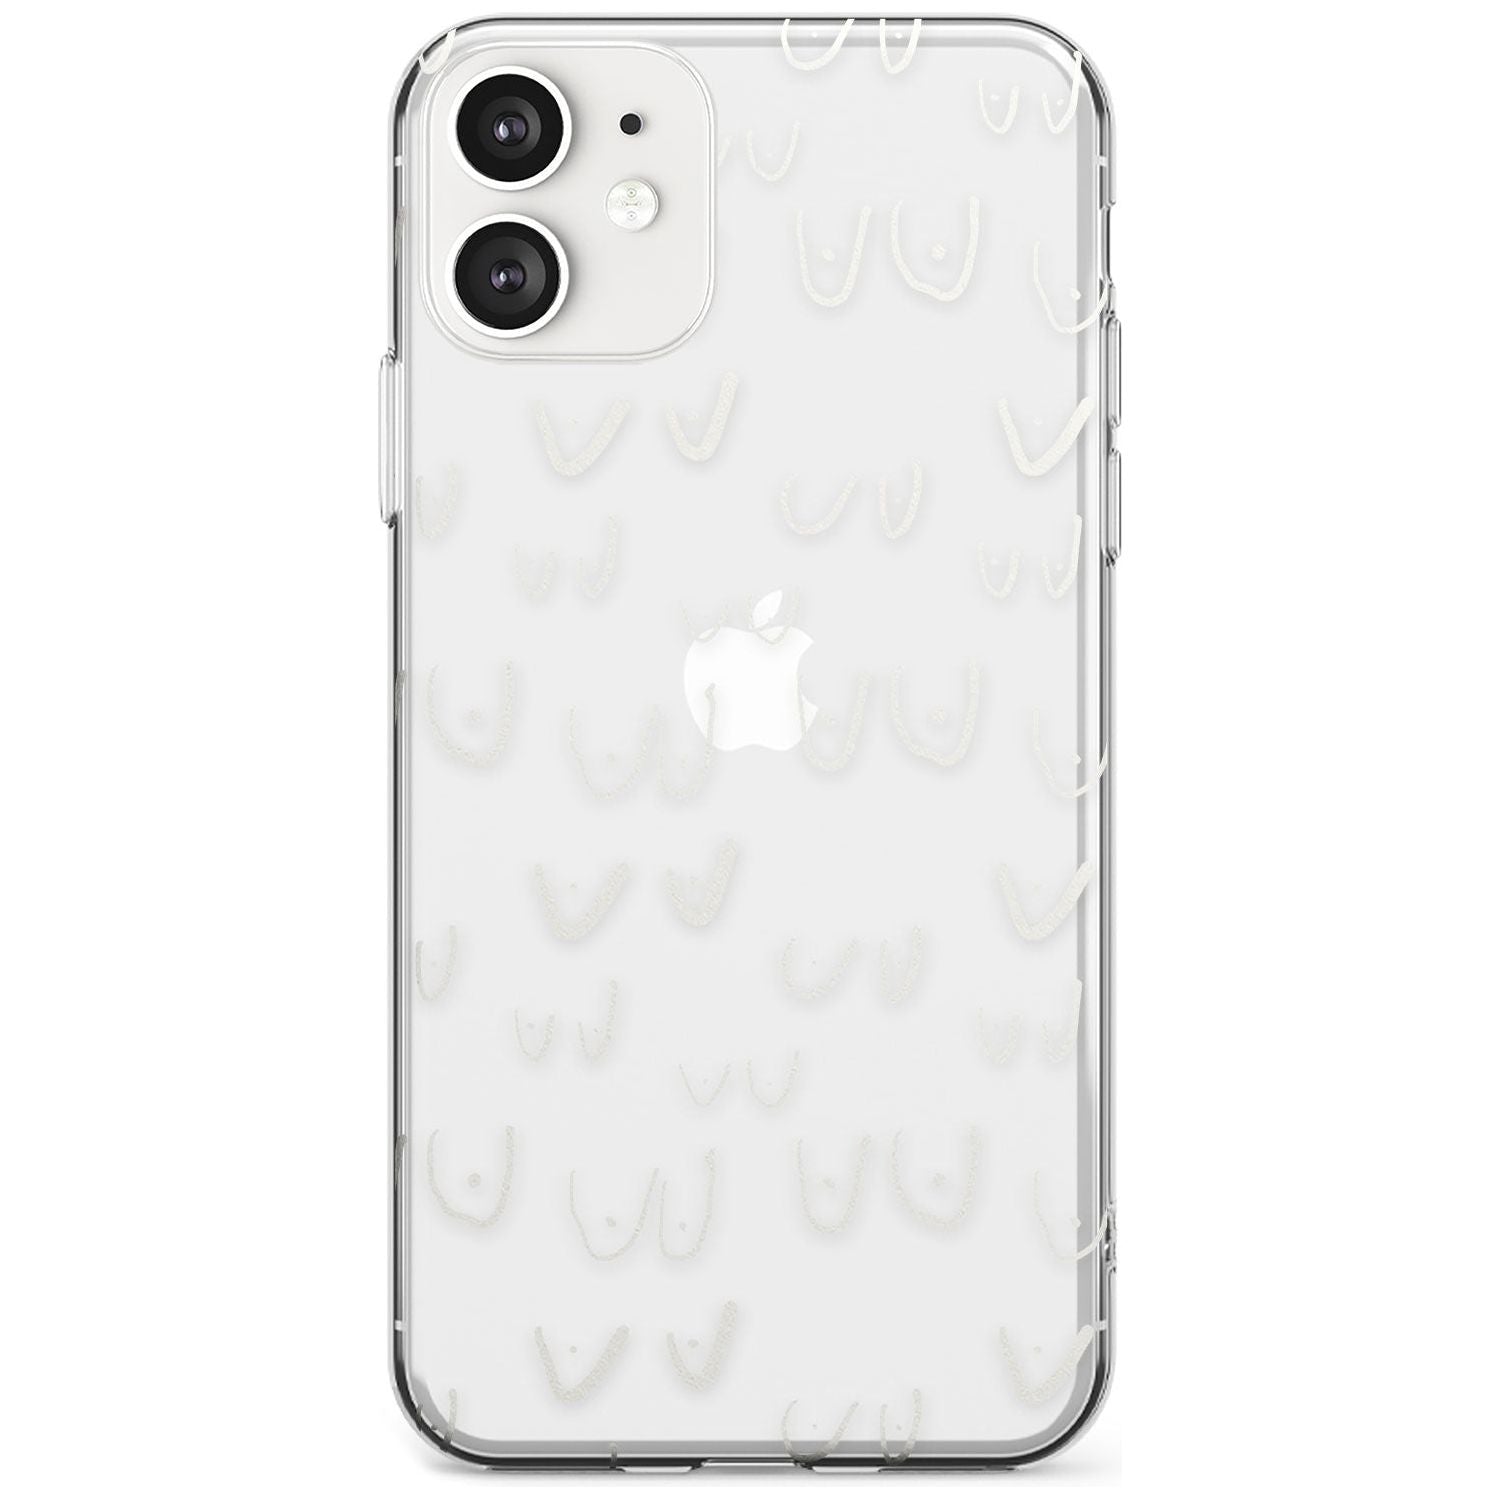 Boob Pattern (White) Black Impact Phone Case for iPhone 11